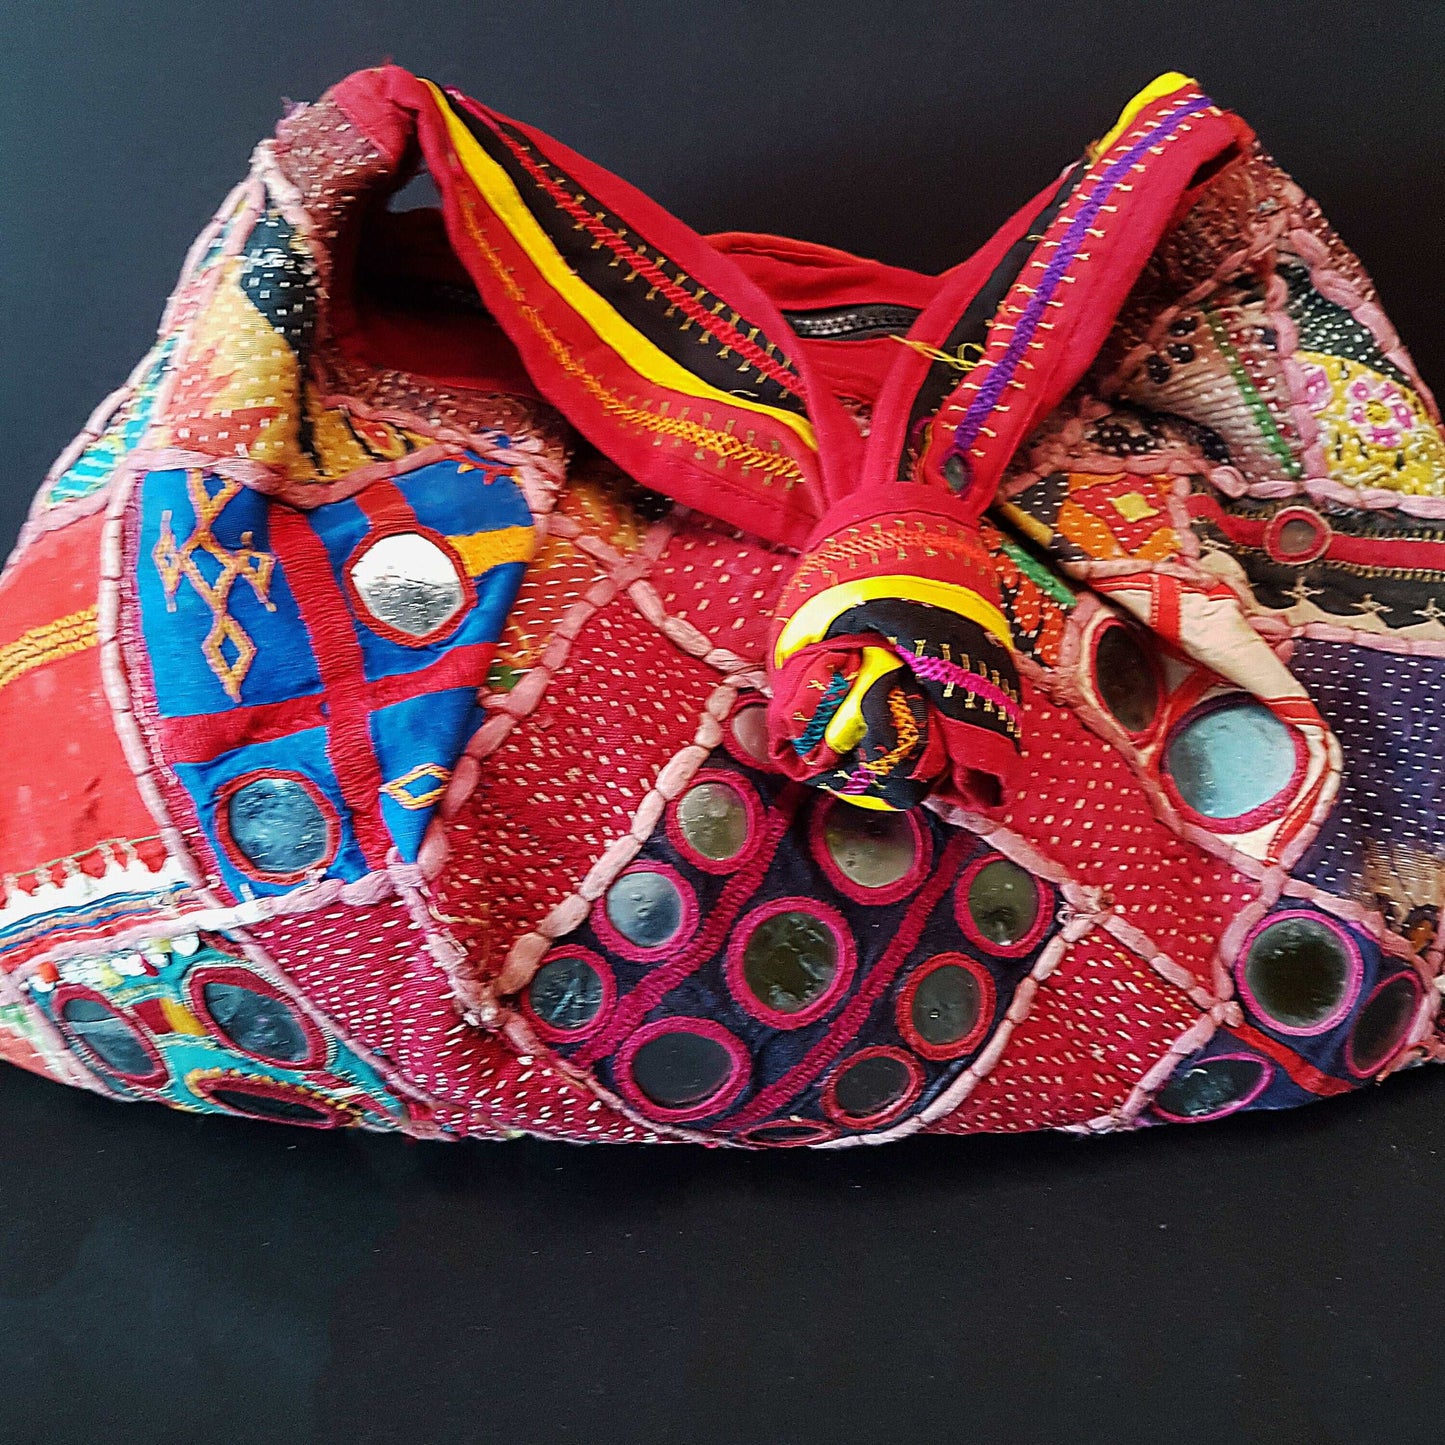 Banjara shoulder bag. Authentic vintage tribal gypsy dowry bag in red & royal blue with hand embroidery. Spectacular mirrorwork decoration. - Vintage India Ca